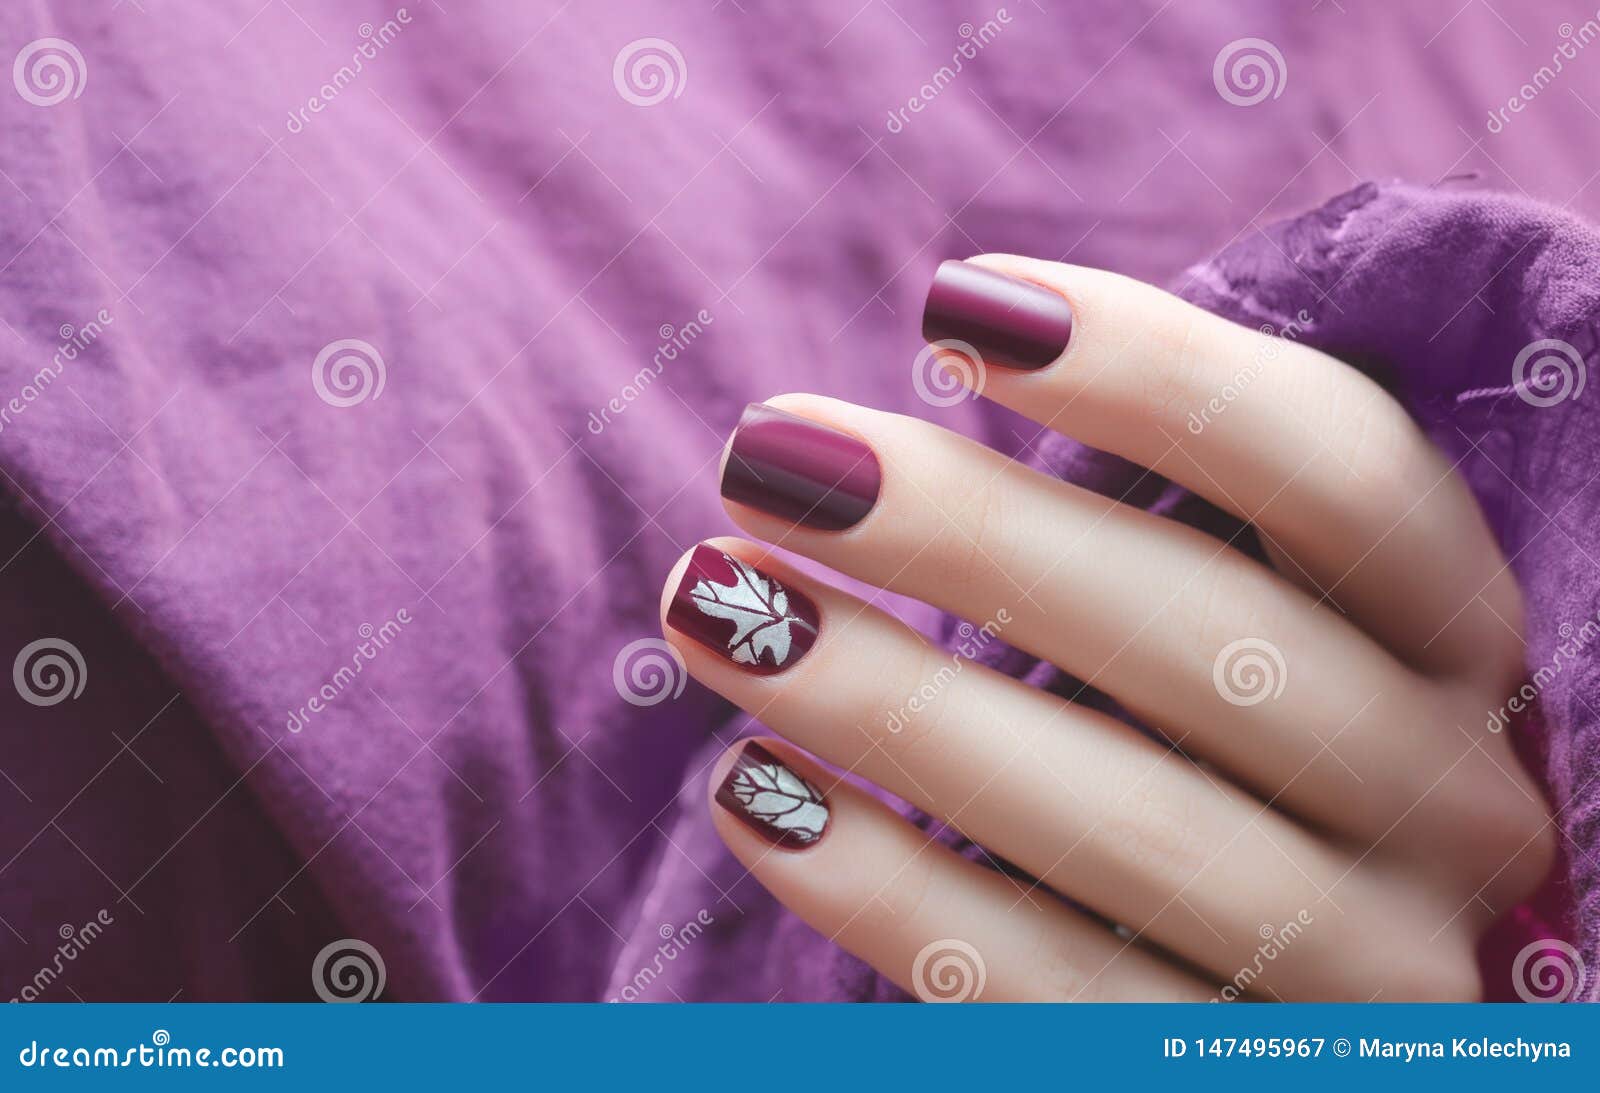 1. Simple Grey and Purple Nail Design - wide 6